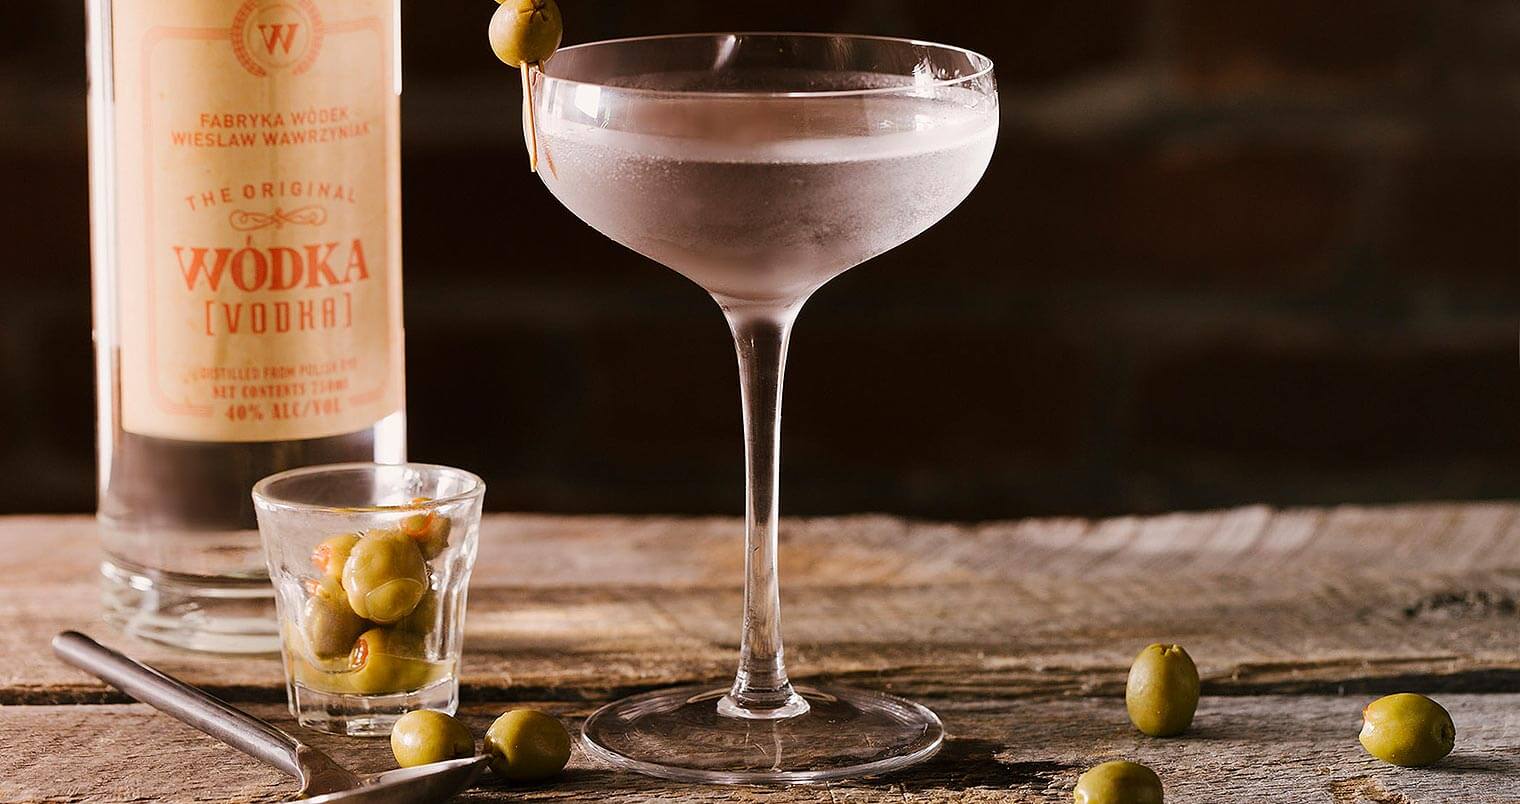 Wódka Martini, featured image, bottle and cocktail, olives